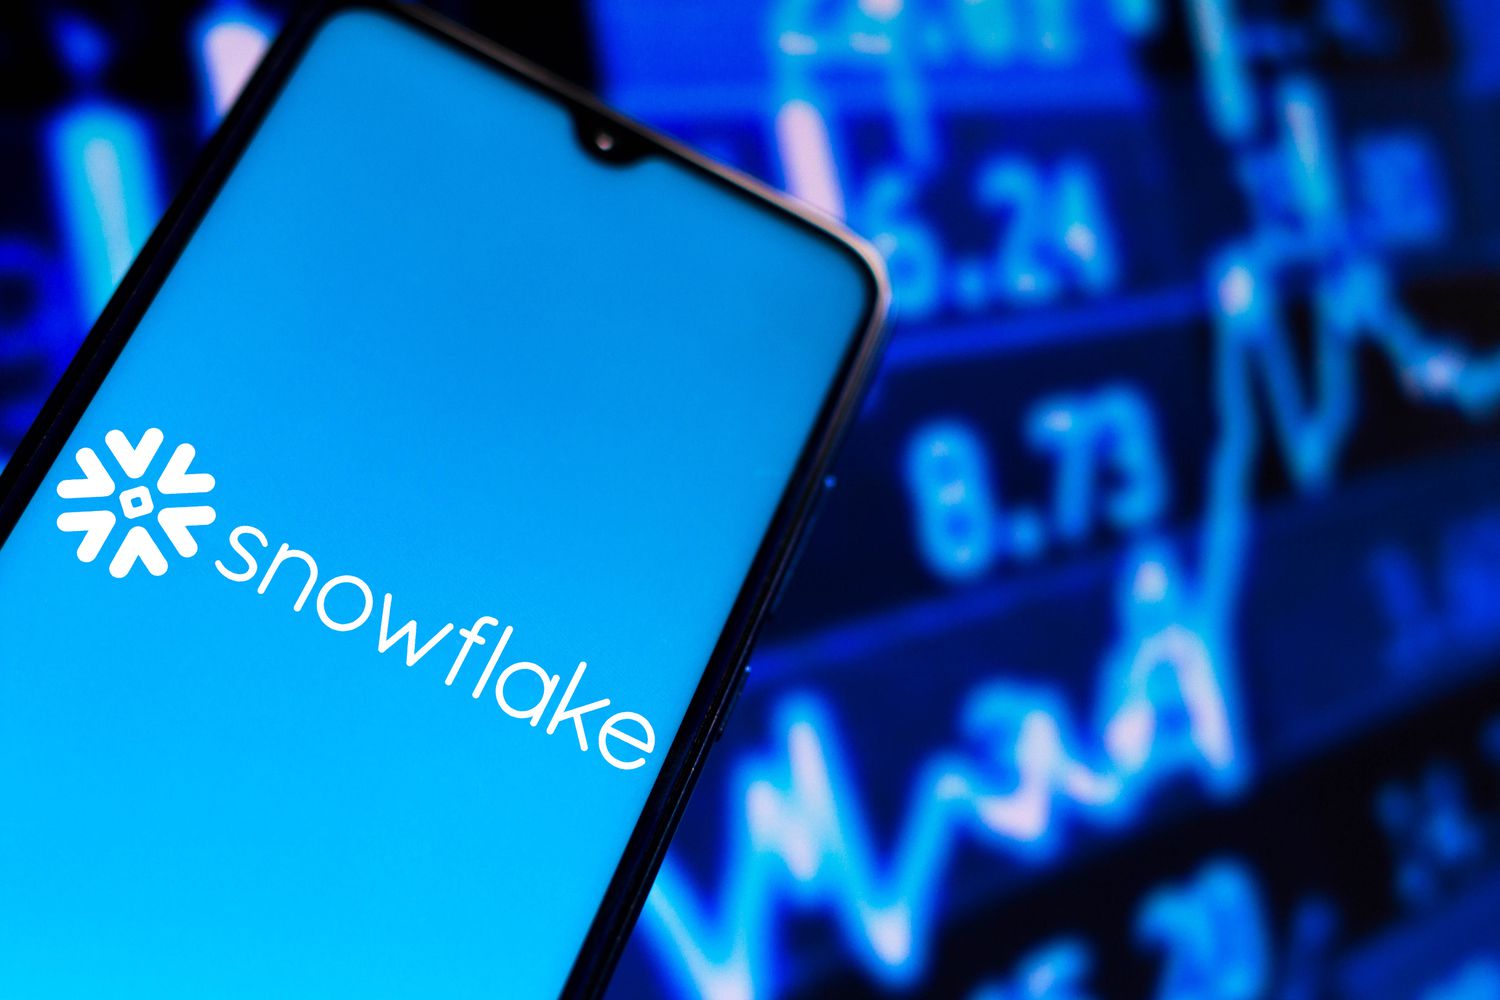 Snowflake Stock Jumps as KeyBanc Initiates Coverage With ‘Overweight’ Rating [Video]